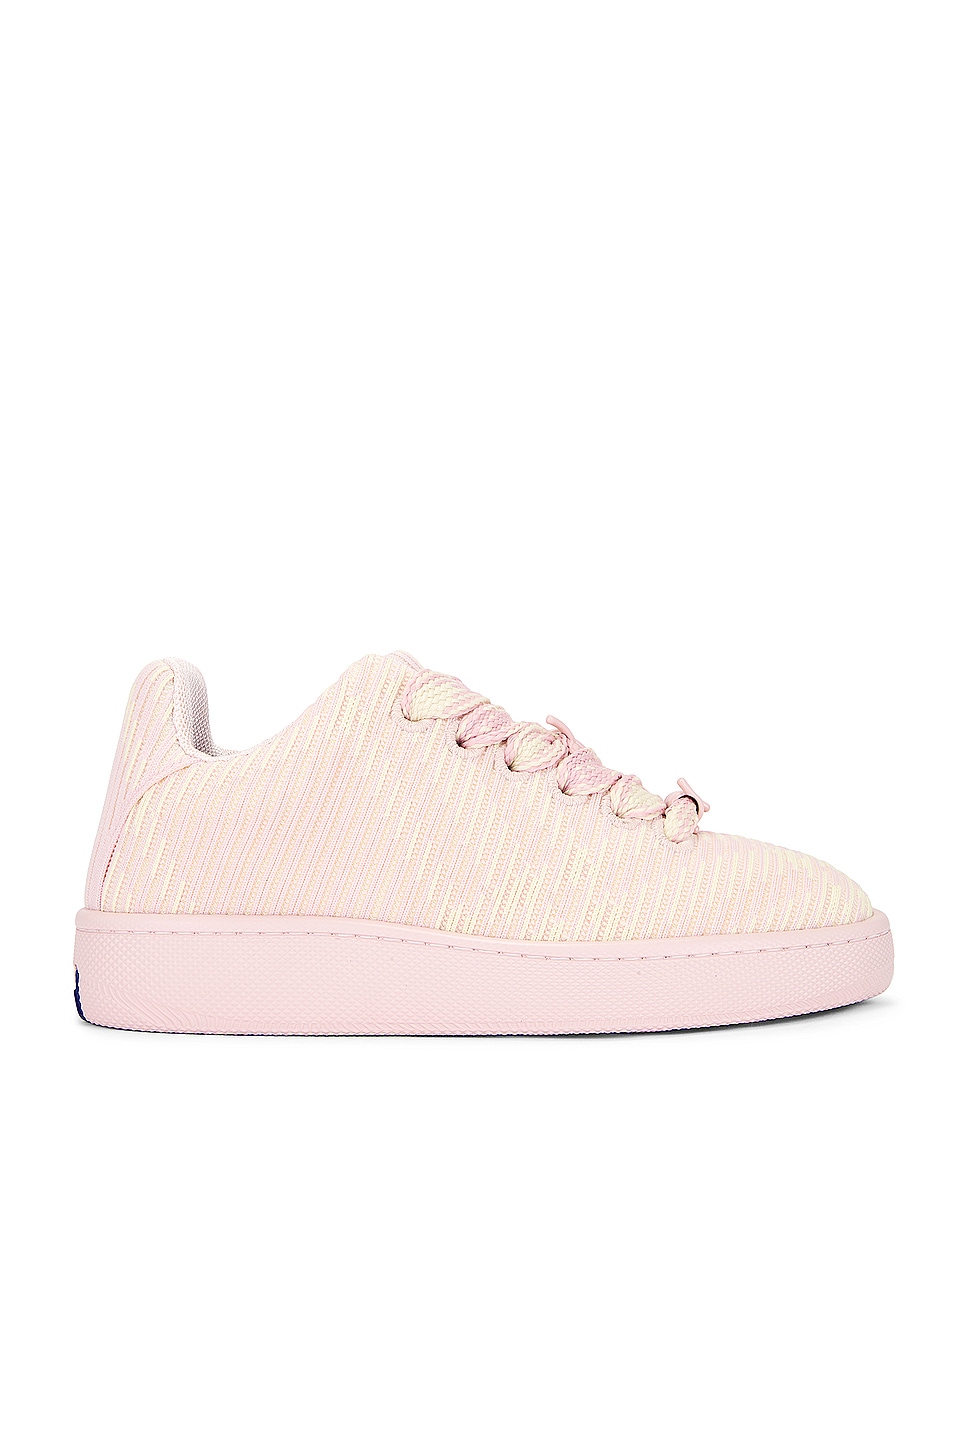 Image 1 of Burberry Knit Sneaker in Cameo IP Check